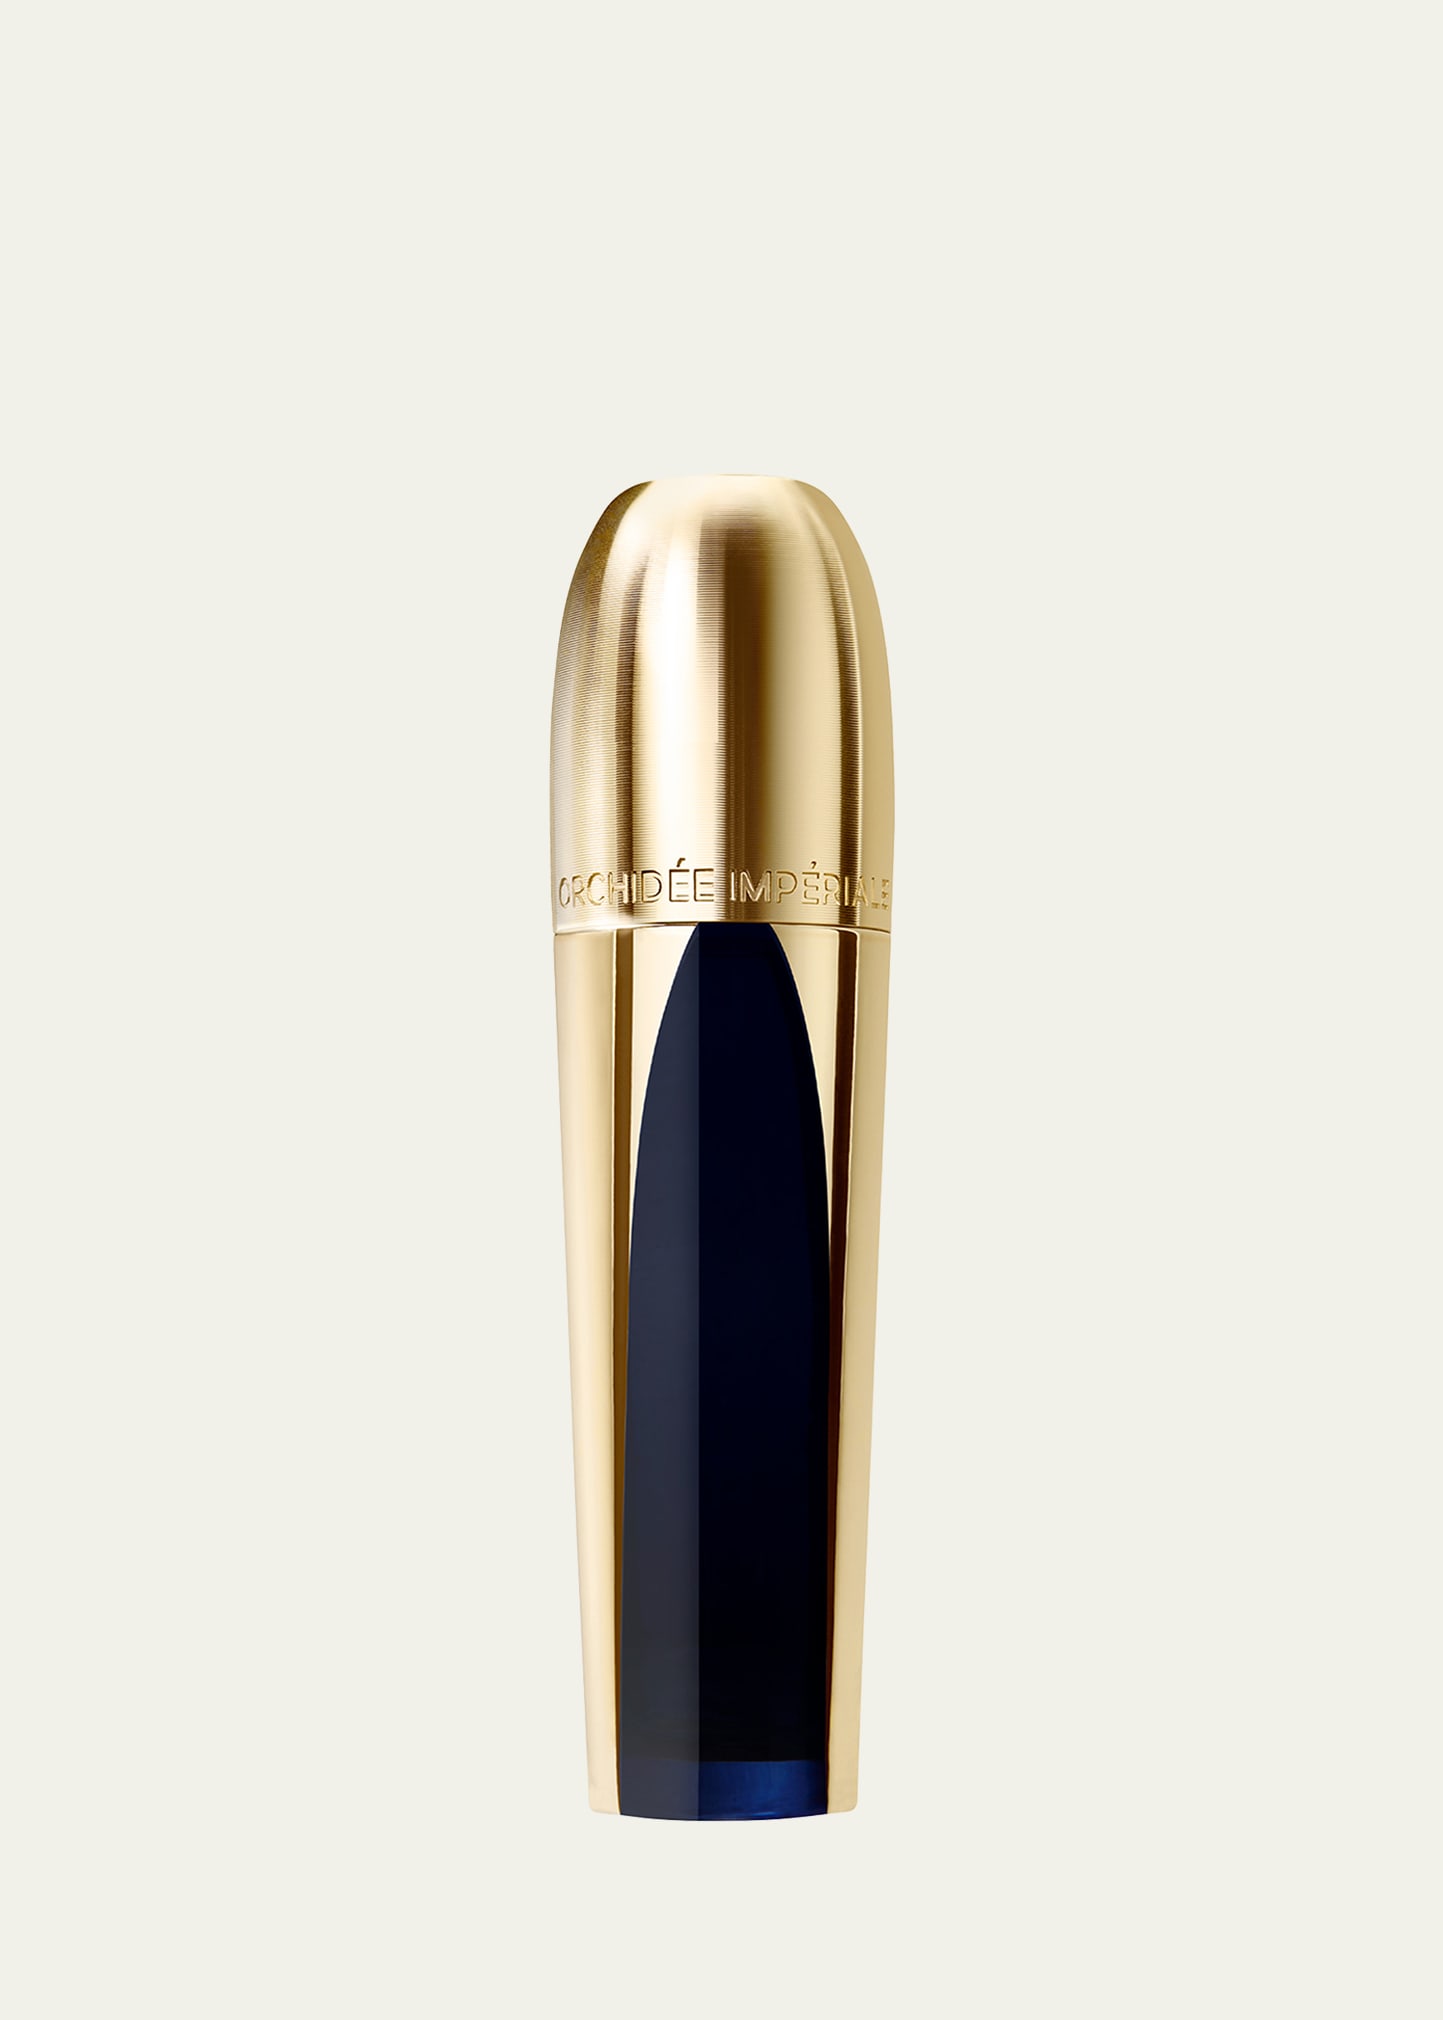 Guerlain Orchidee Imperiale The Longevity Concentrate Serum, 1 Oz.